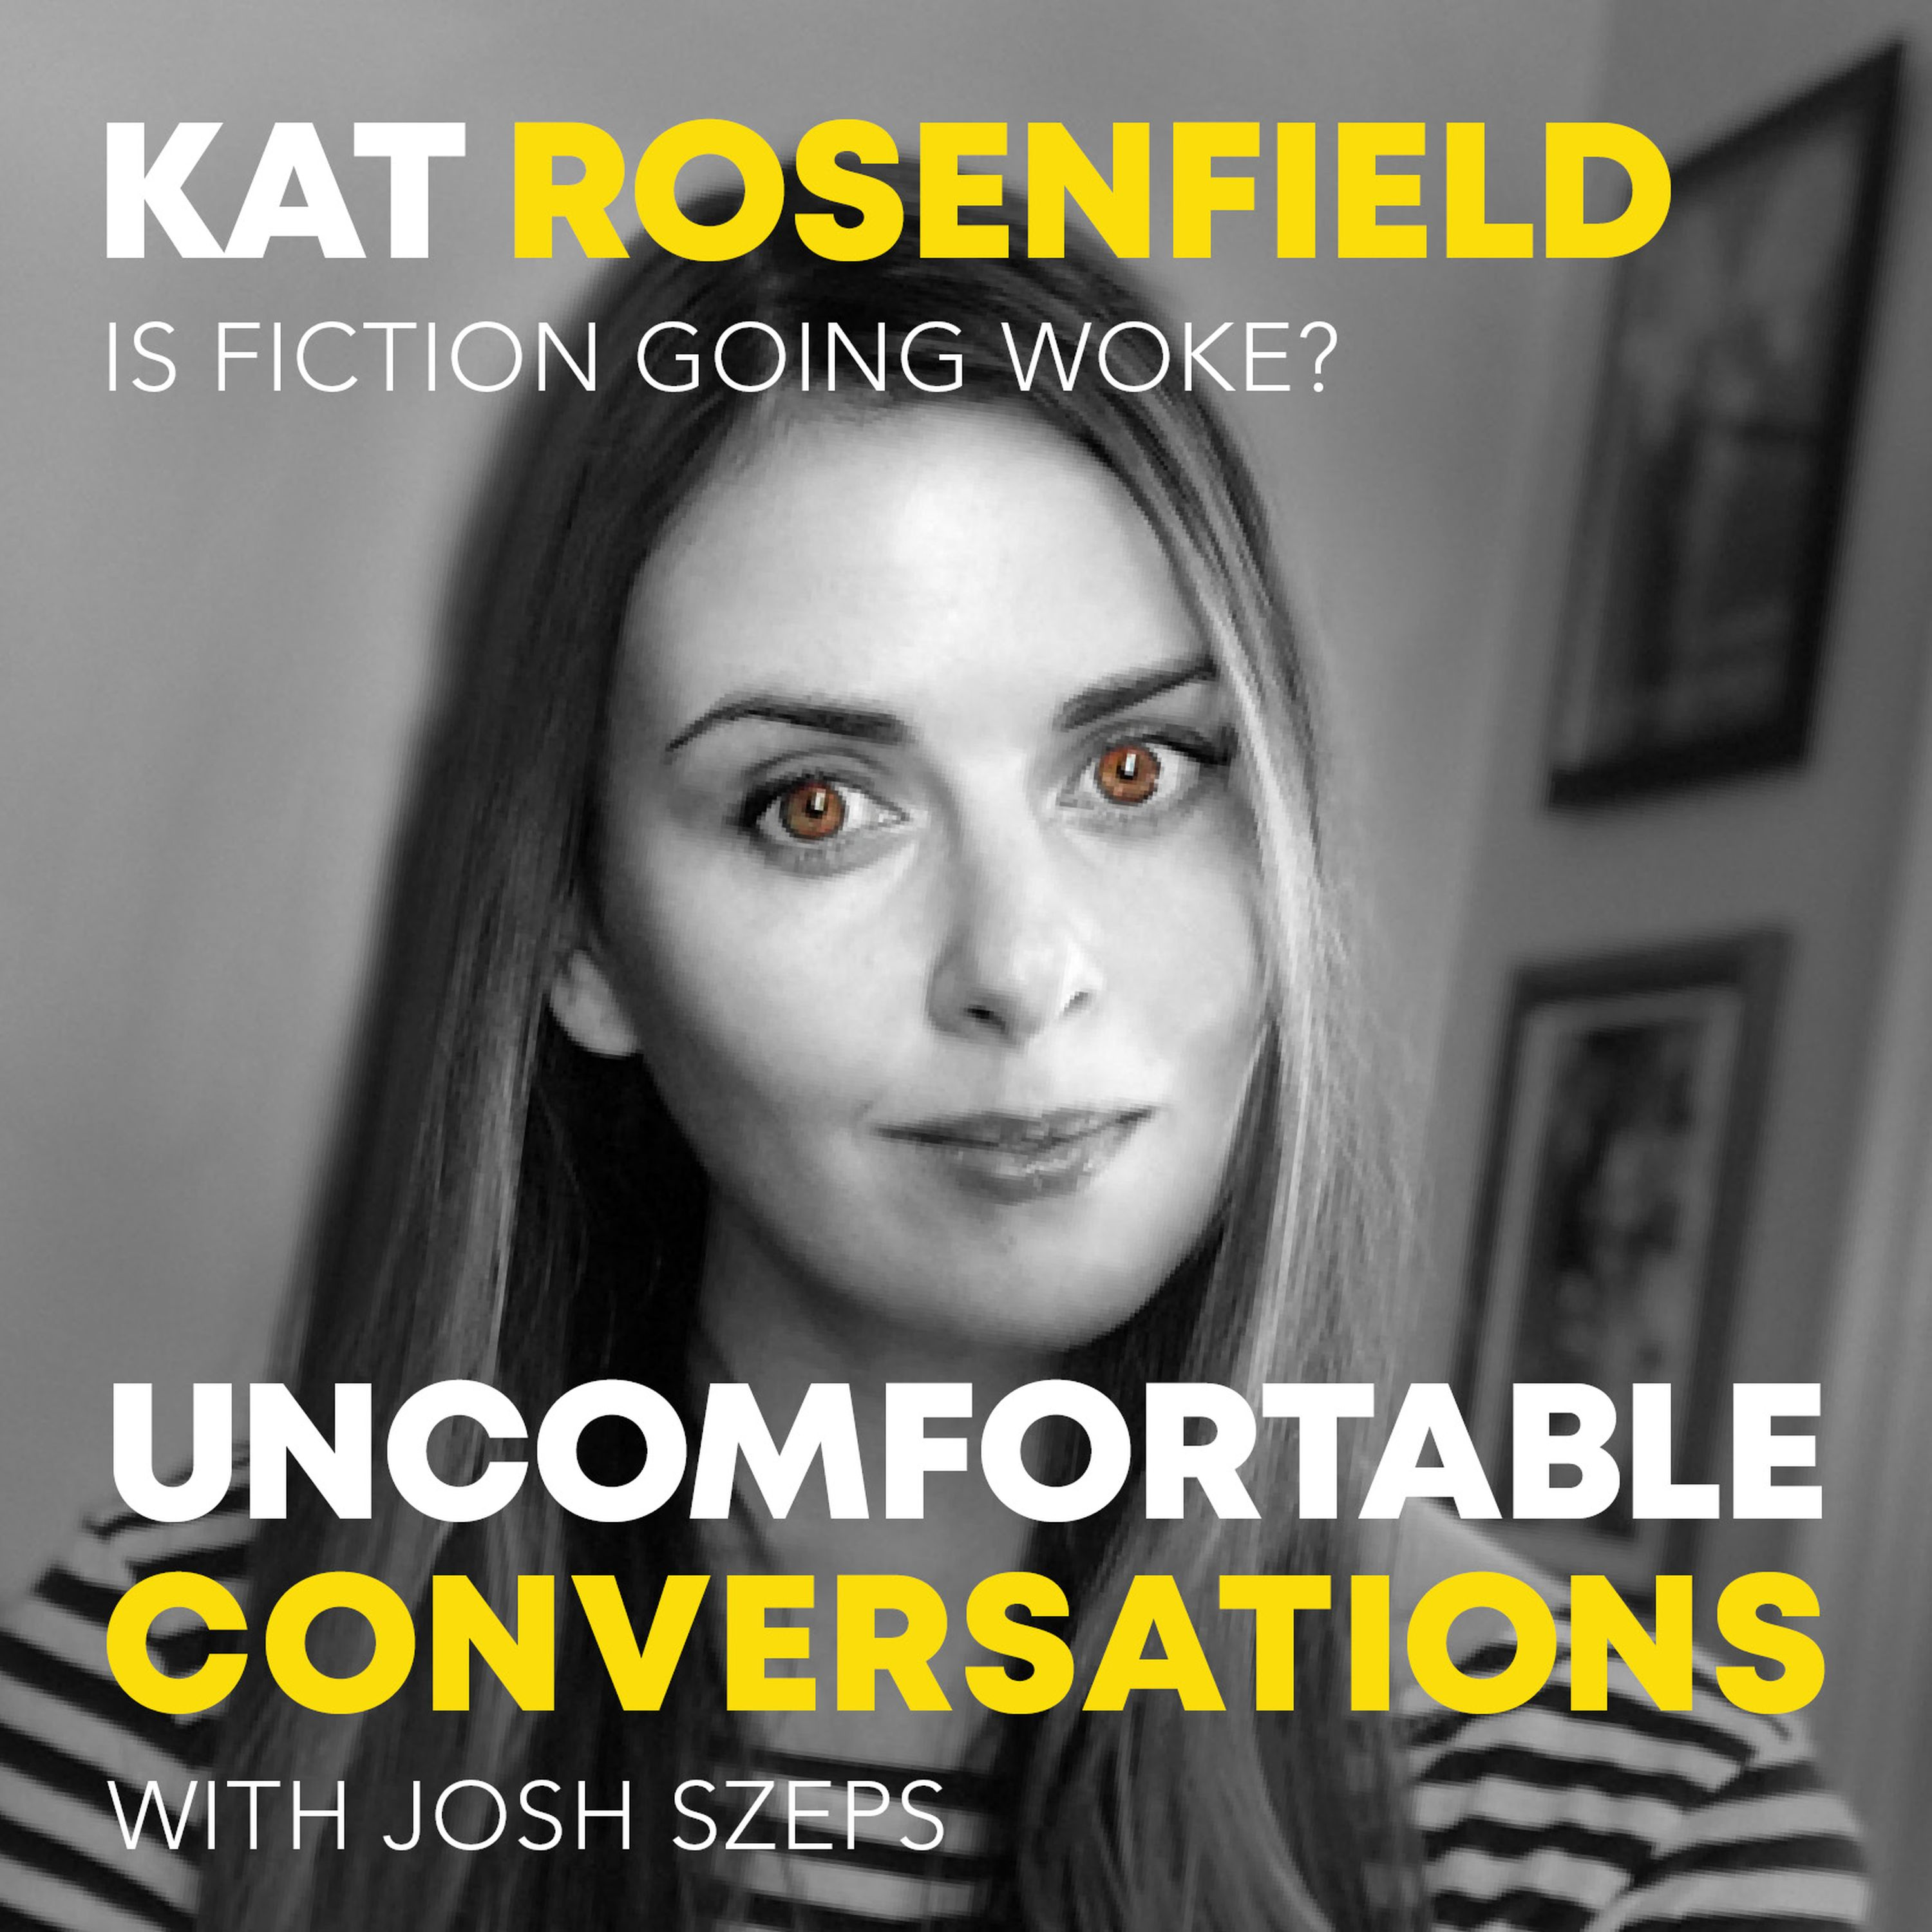 "Is Fiction Going Woke?" with Kat Rosenfield